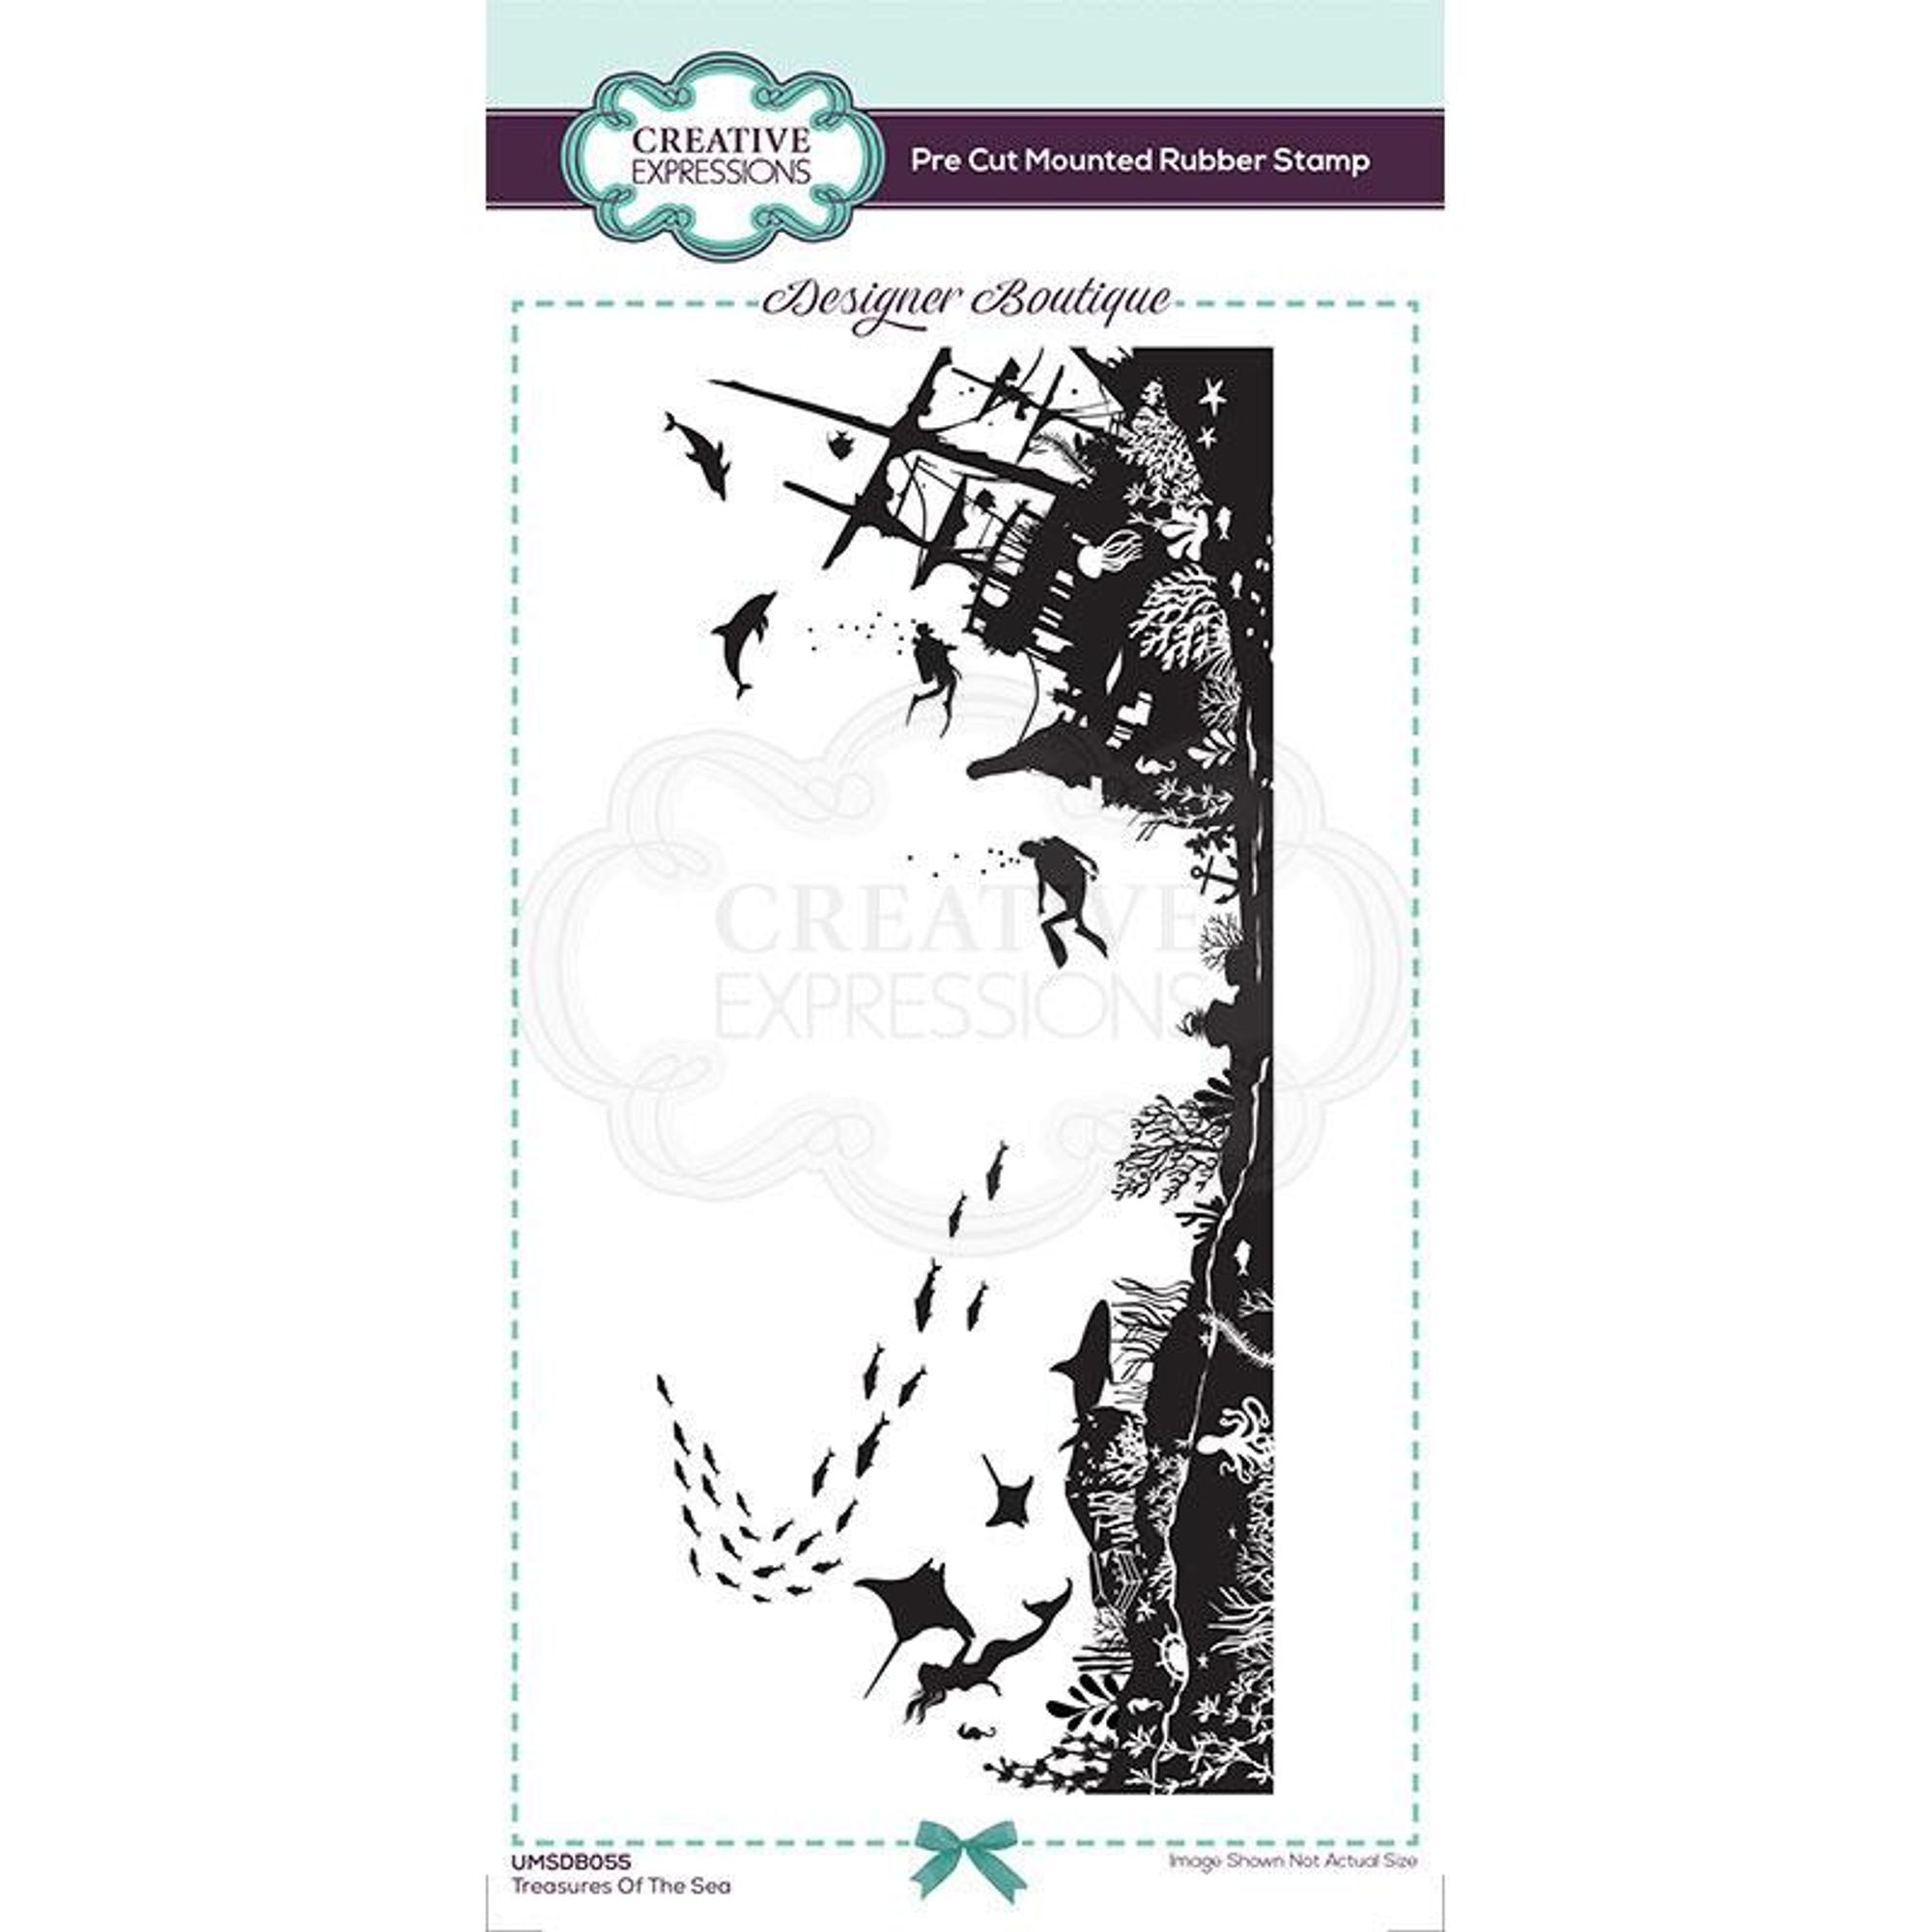 Creative Expressions Designer Boutique Collection Treasures of the Sea DL Pre Cut Rubber Stamp